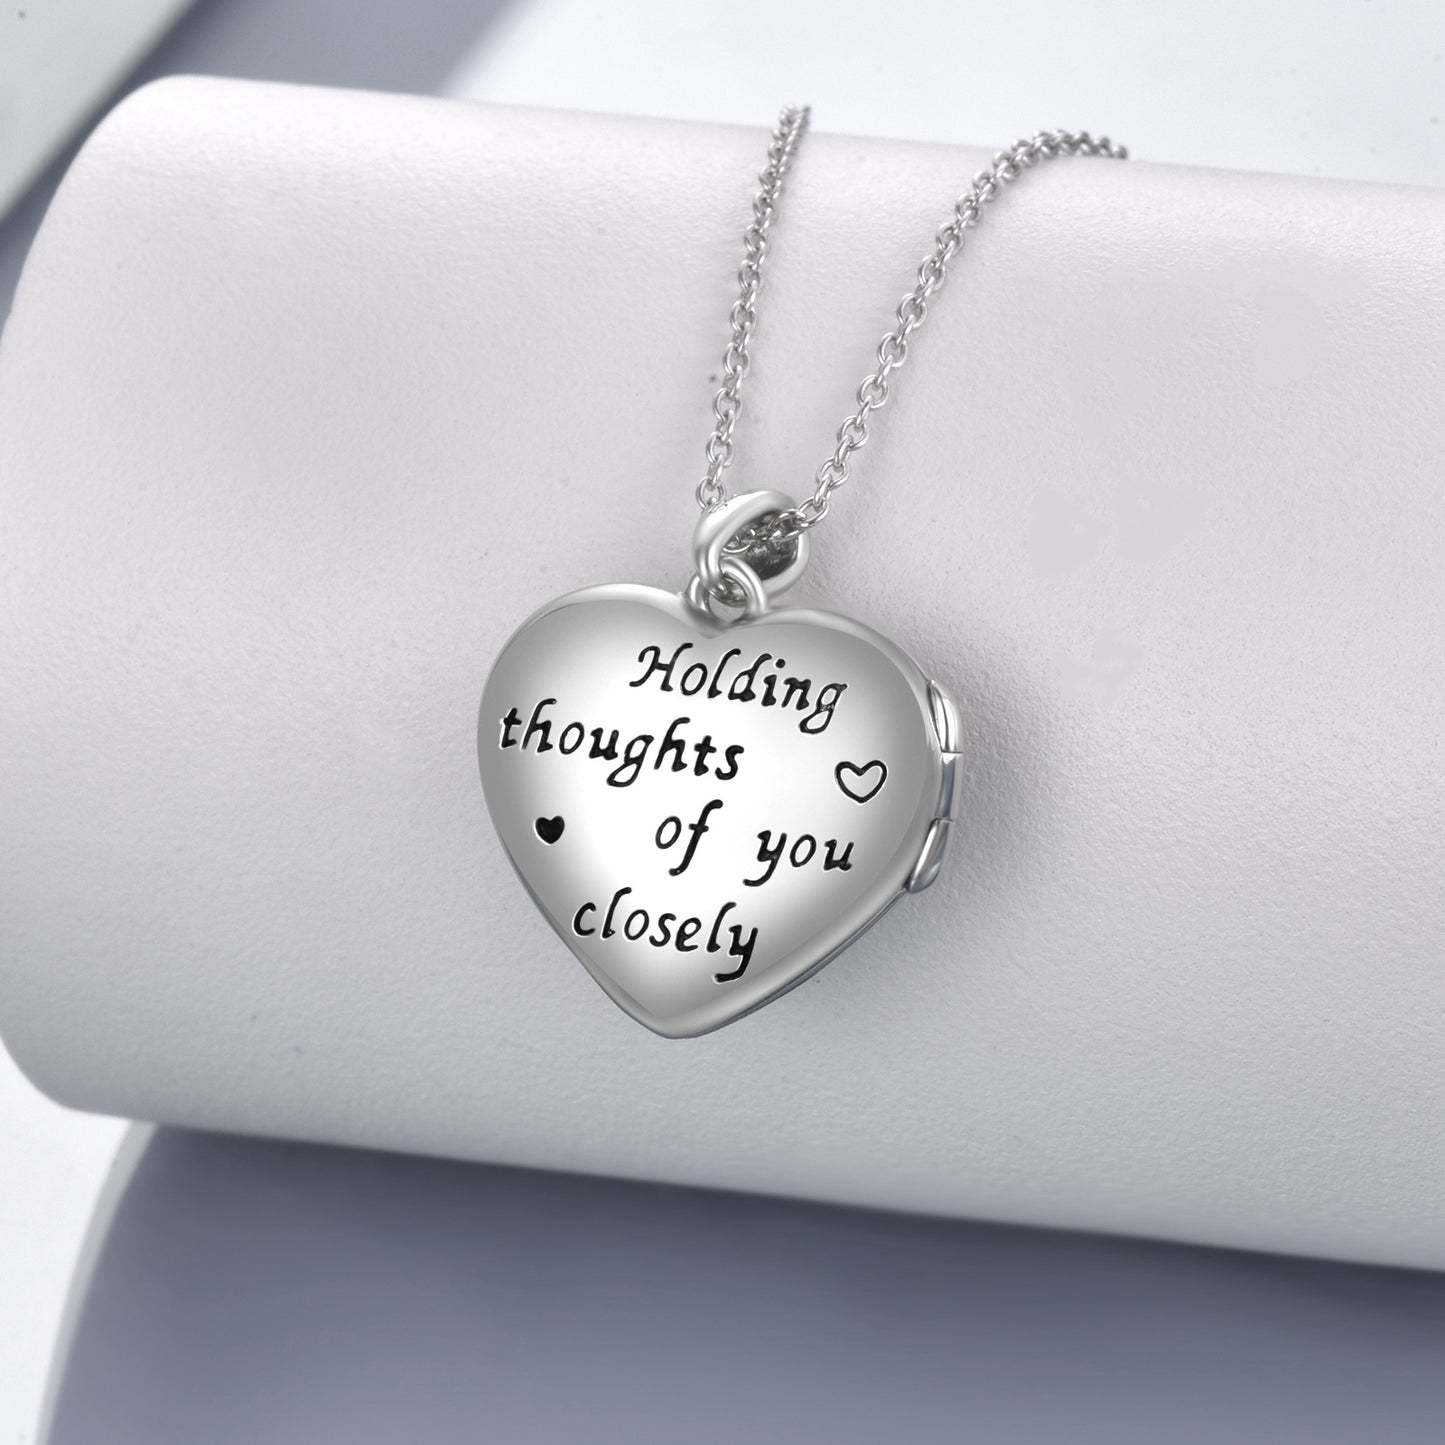 YFN Sterling Silver Forget-me-not Heart Locket That Holds Pictures Memory Locket Necklace (Gift Box included)